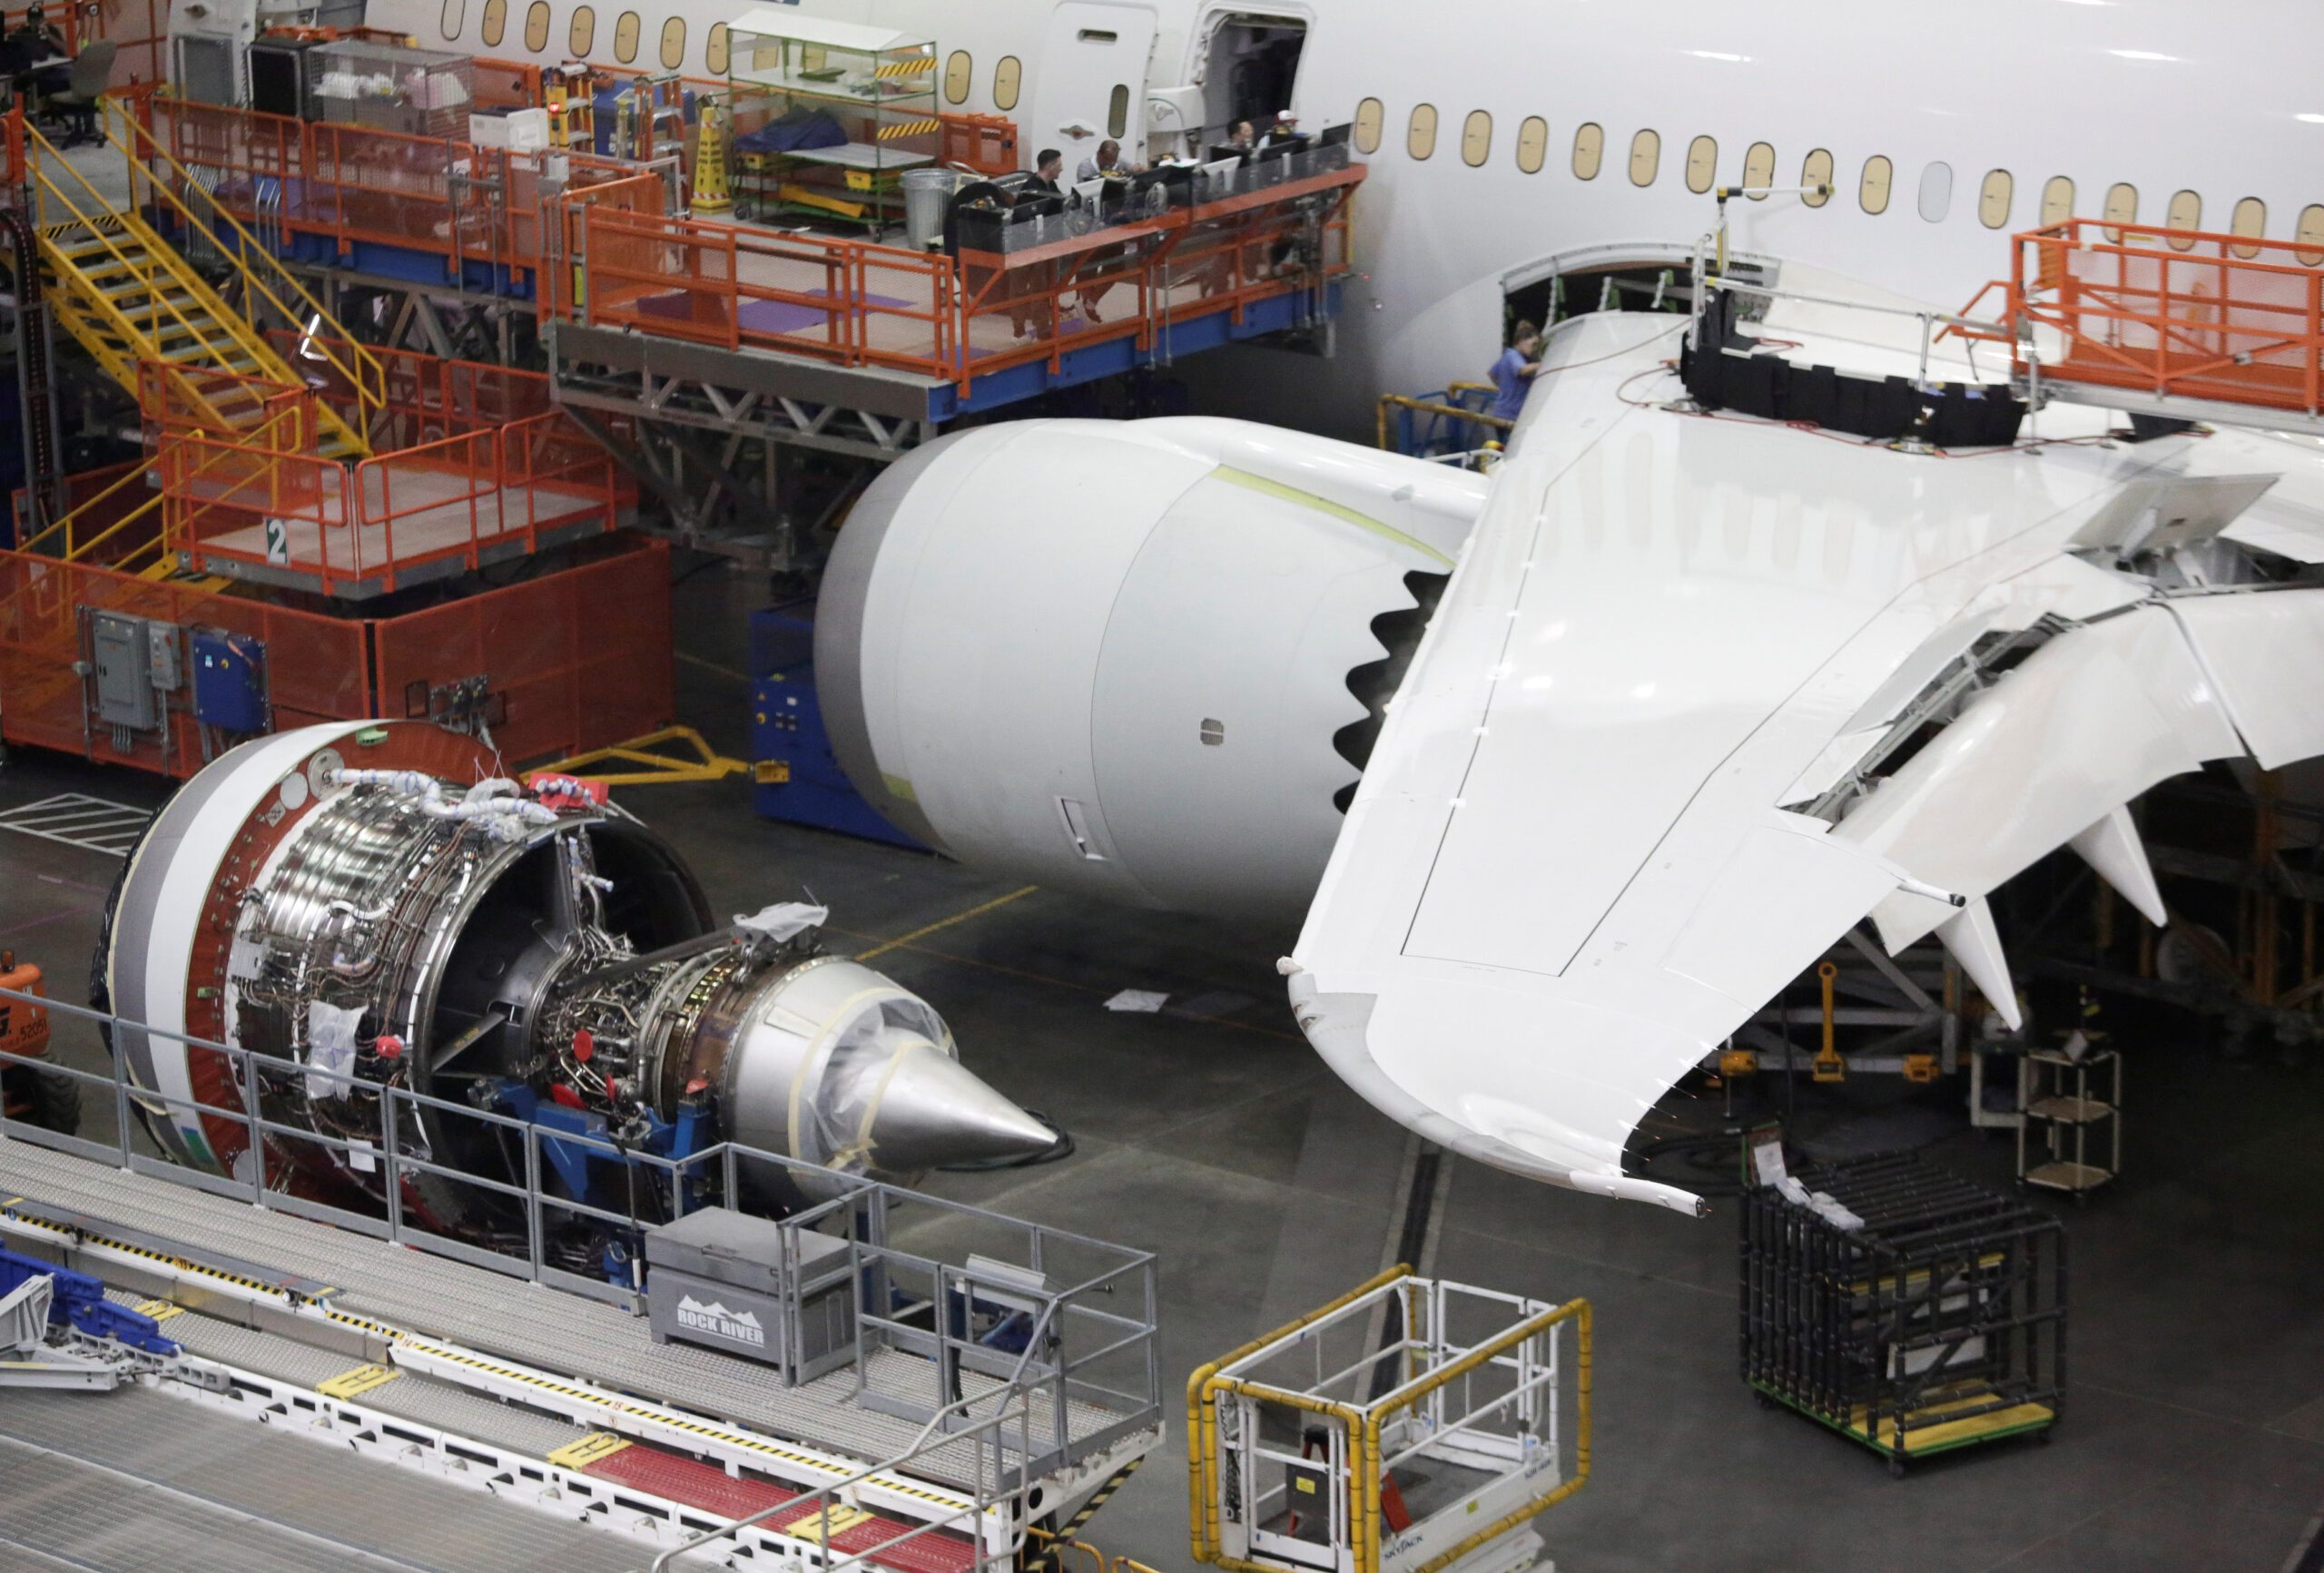 An engine for a Boeing 787 is pictured at Boeing's production facility in Everett, Washington, U.S.